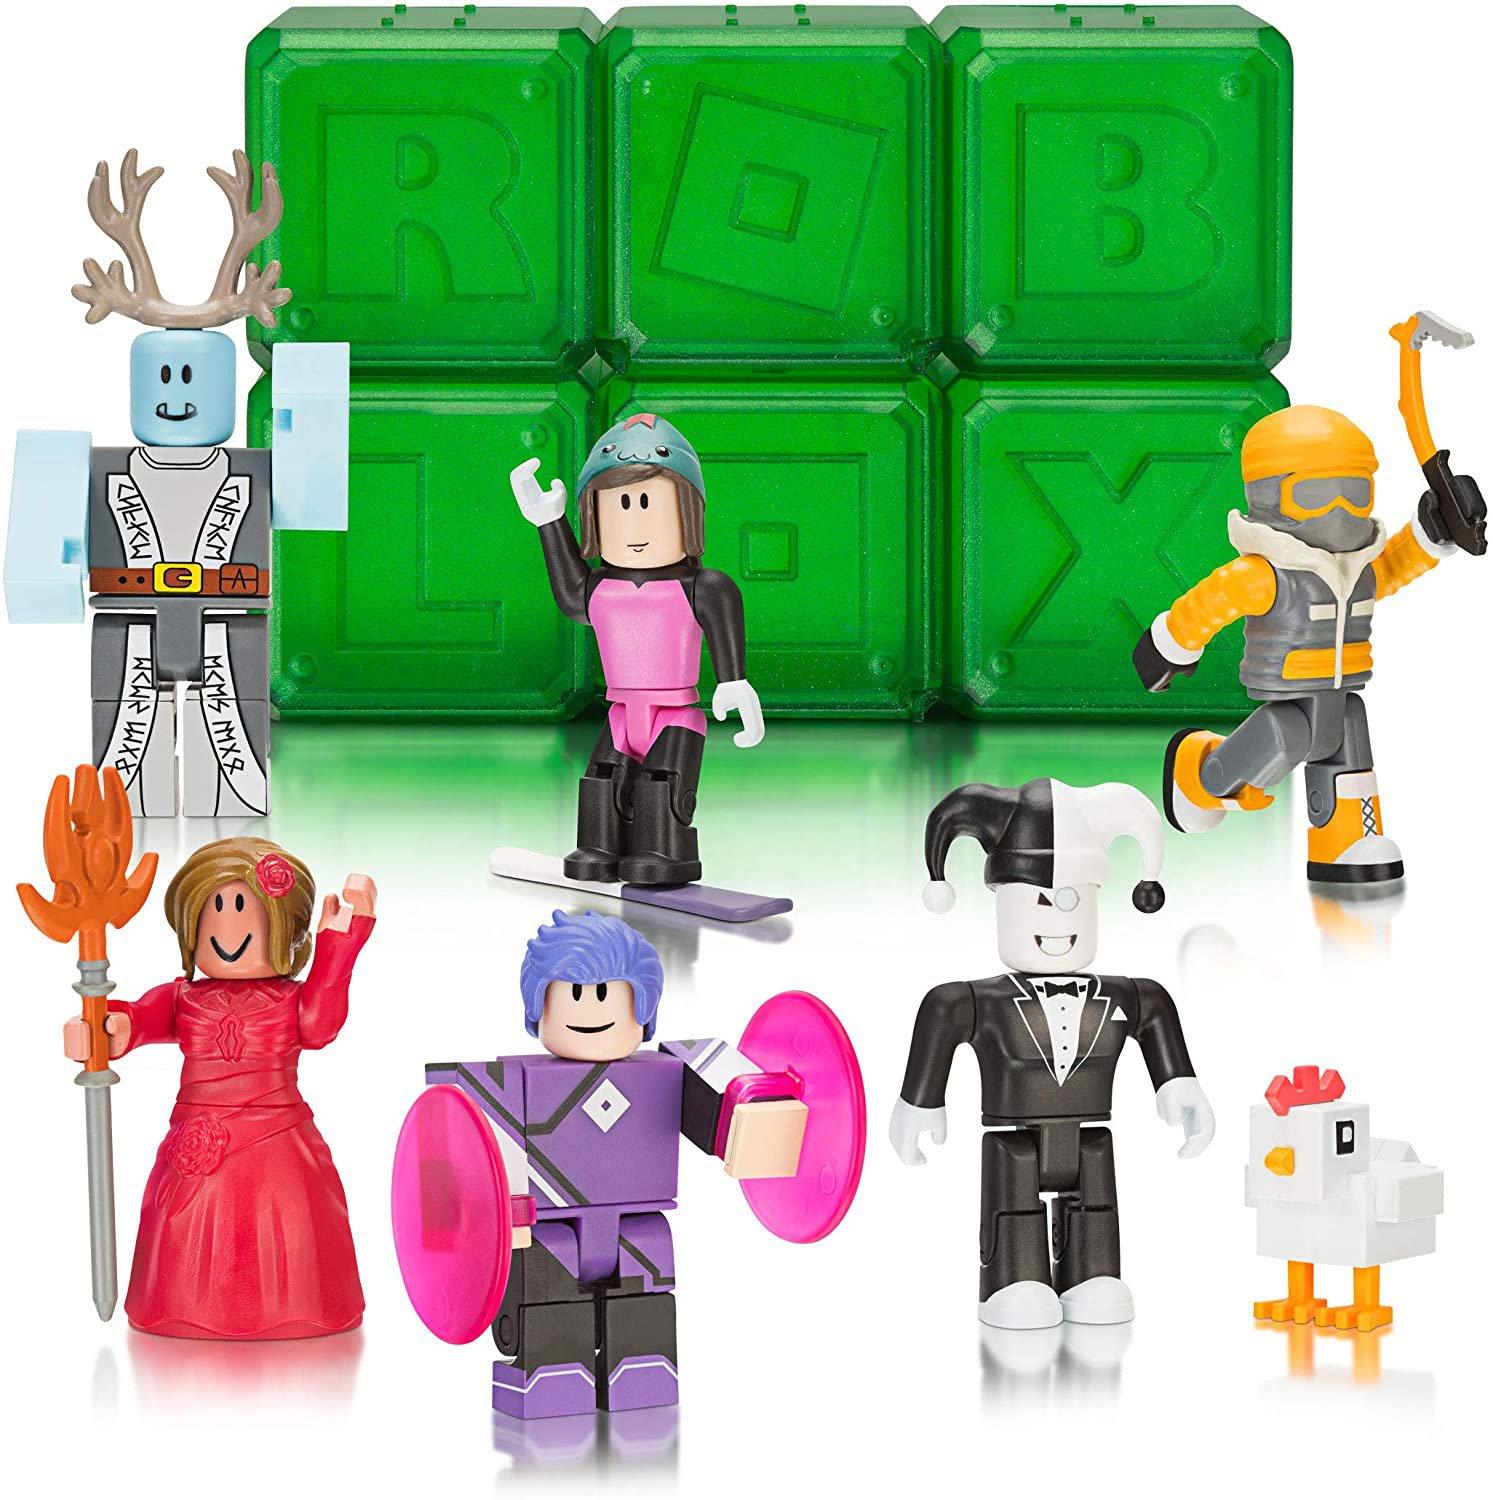 Roblox Action Collection Series 4 Mystery Figure Includes 1 Figure And Exclusive Virtual Item Gamestop - roblox xbox 360 gamestop